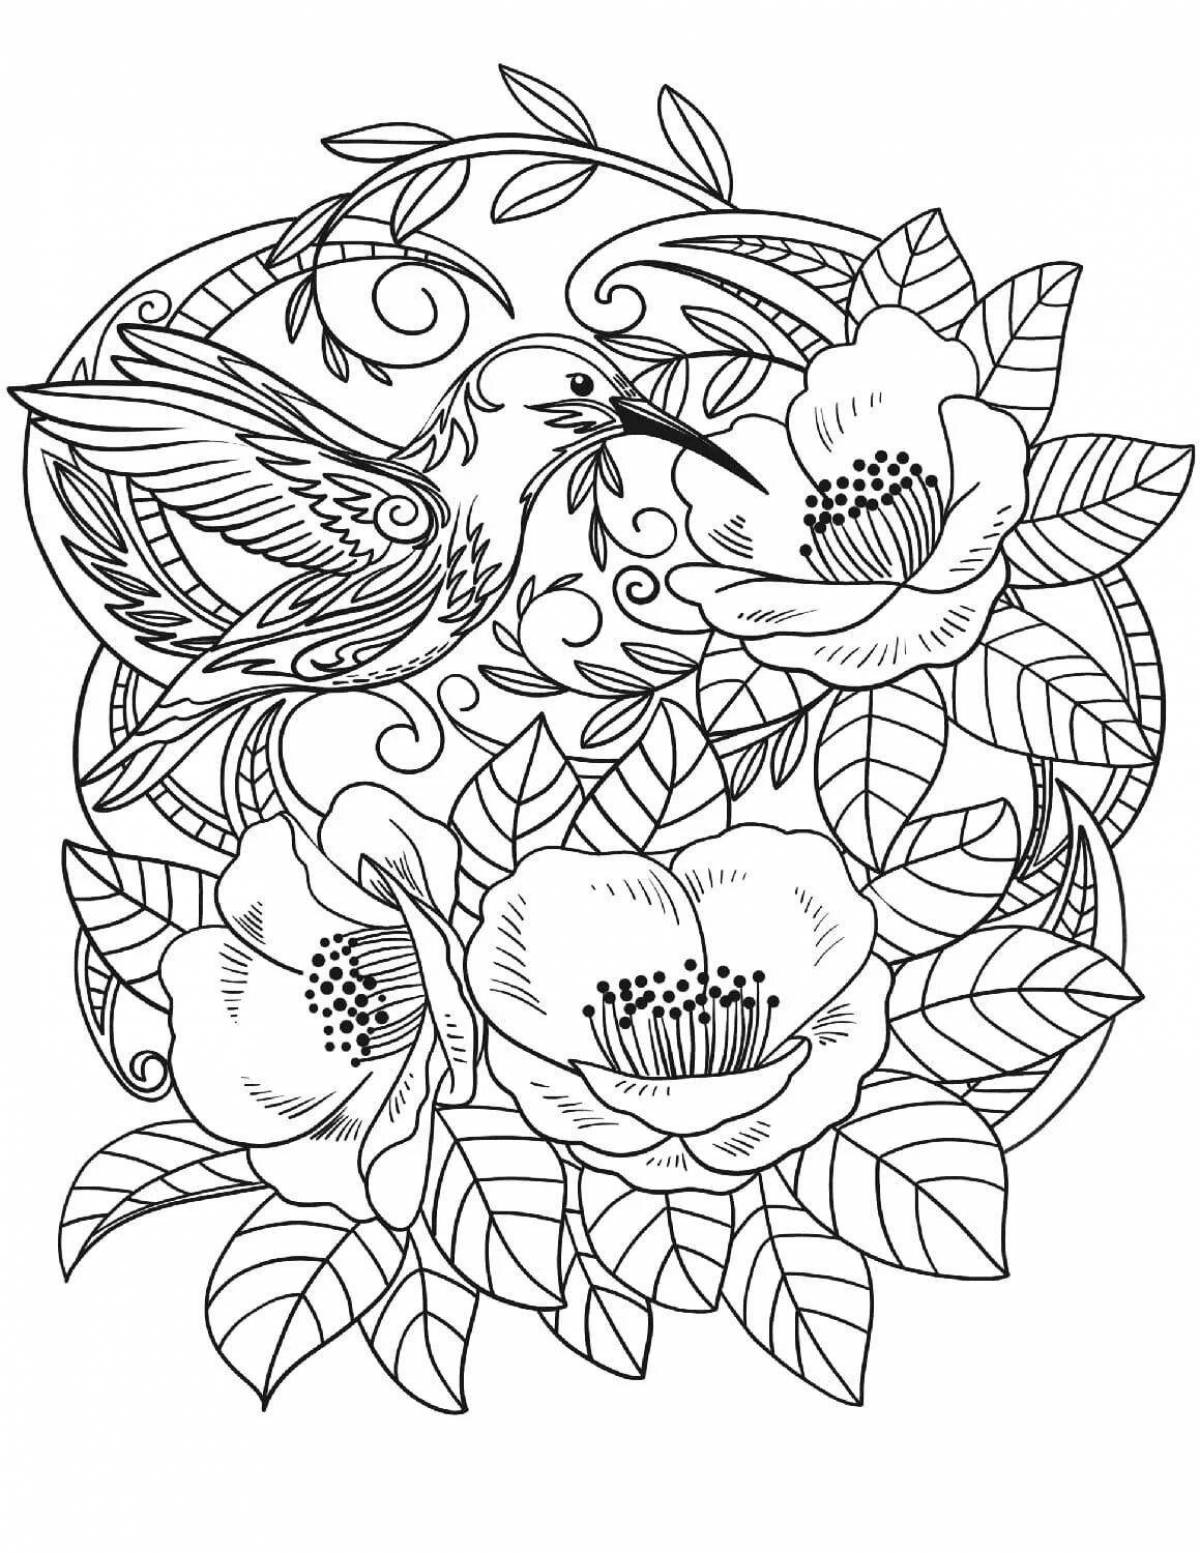 Majestic coloring page beautiful and complex flowers